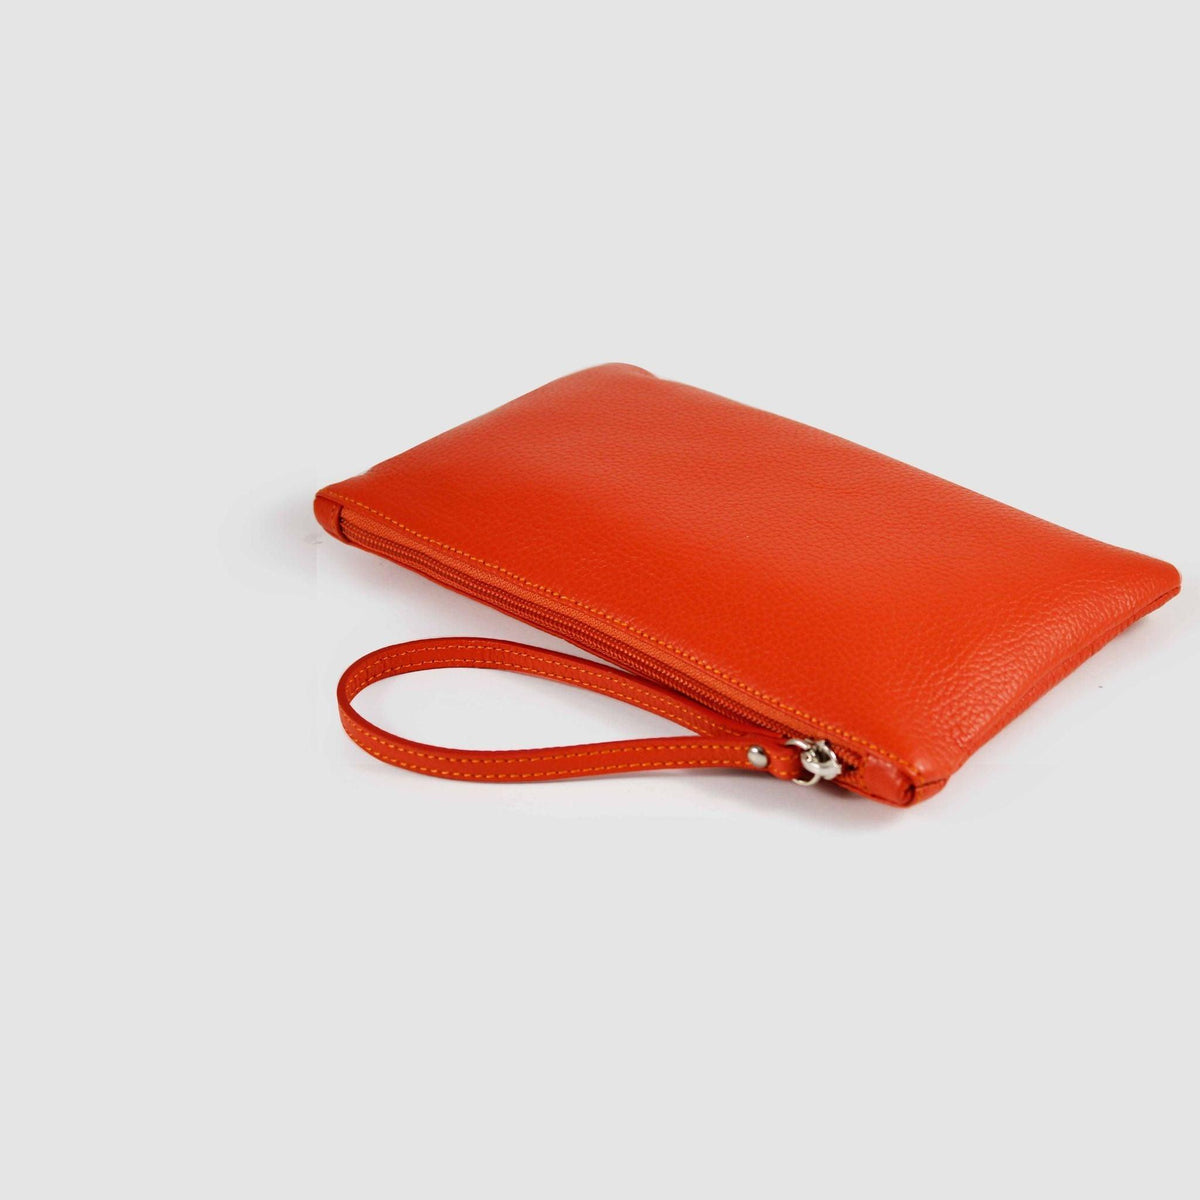 The Wristlet Italian Leather Bag, Made in Italy at MyItalianDecor